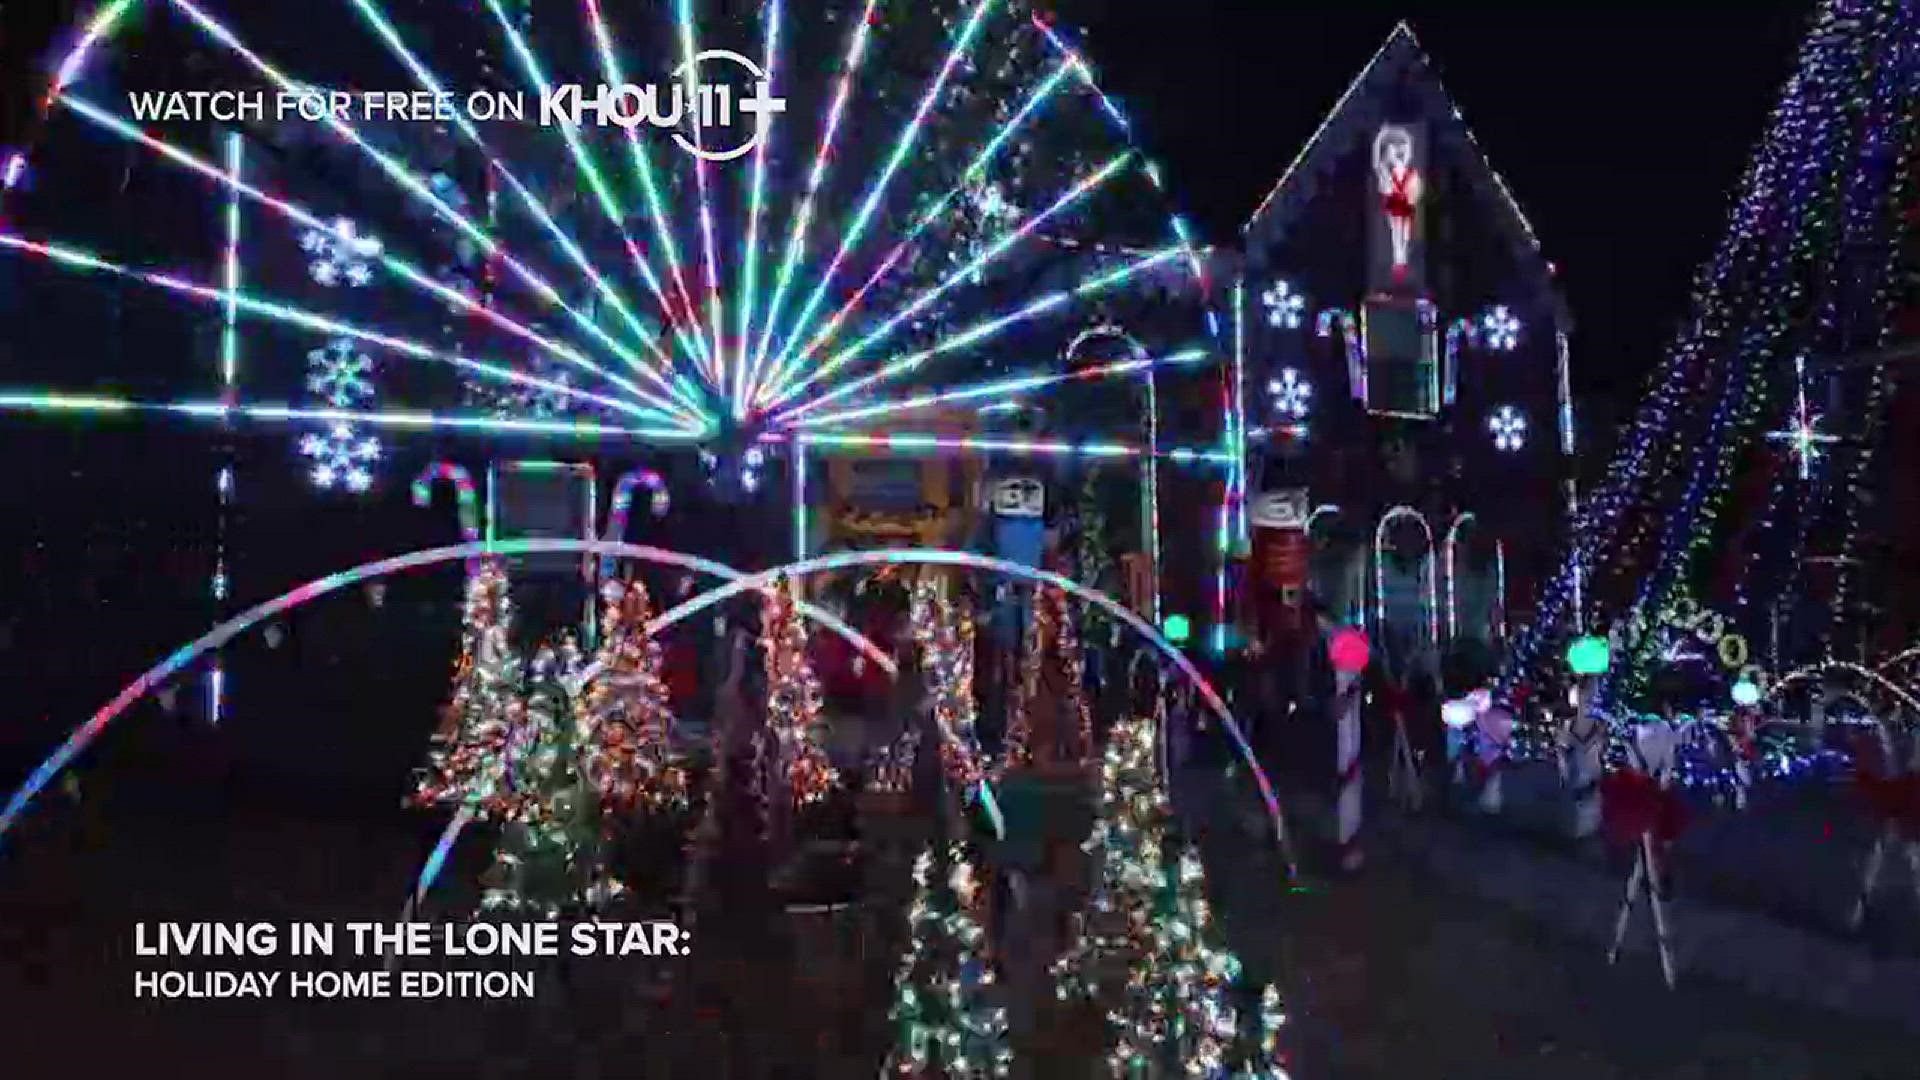 Houston's best holiday light shows, celebrations and more to explore now streaming 24/7 on the KHOU 11+ app using Roku or FireTV.